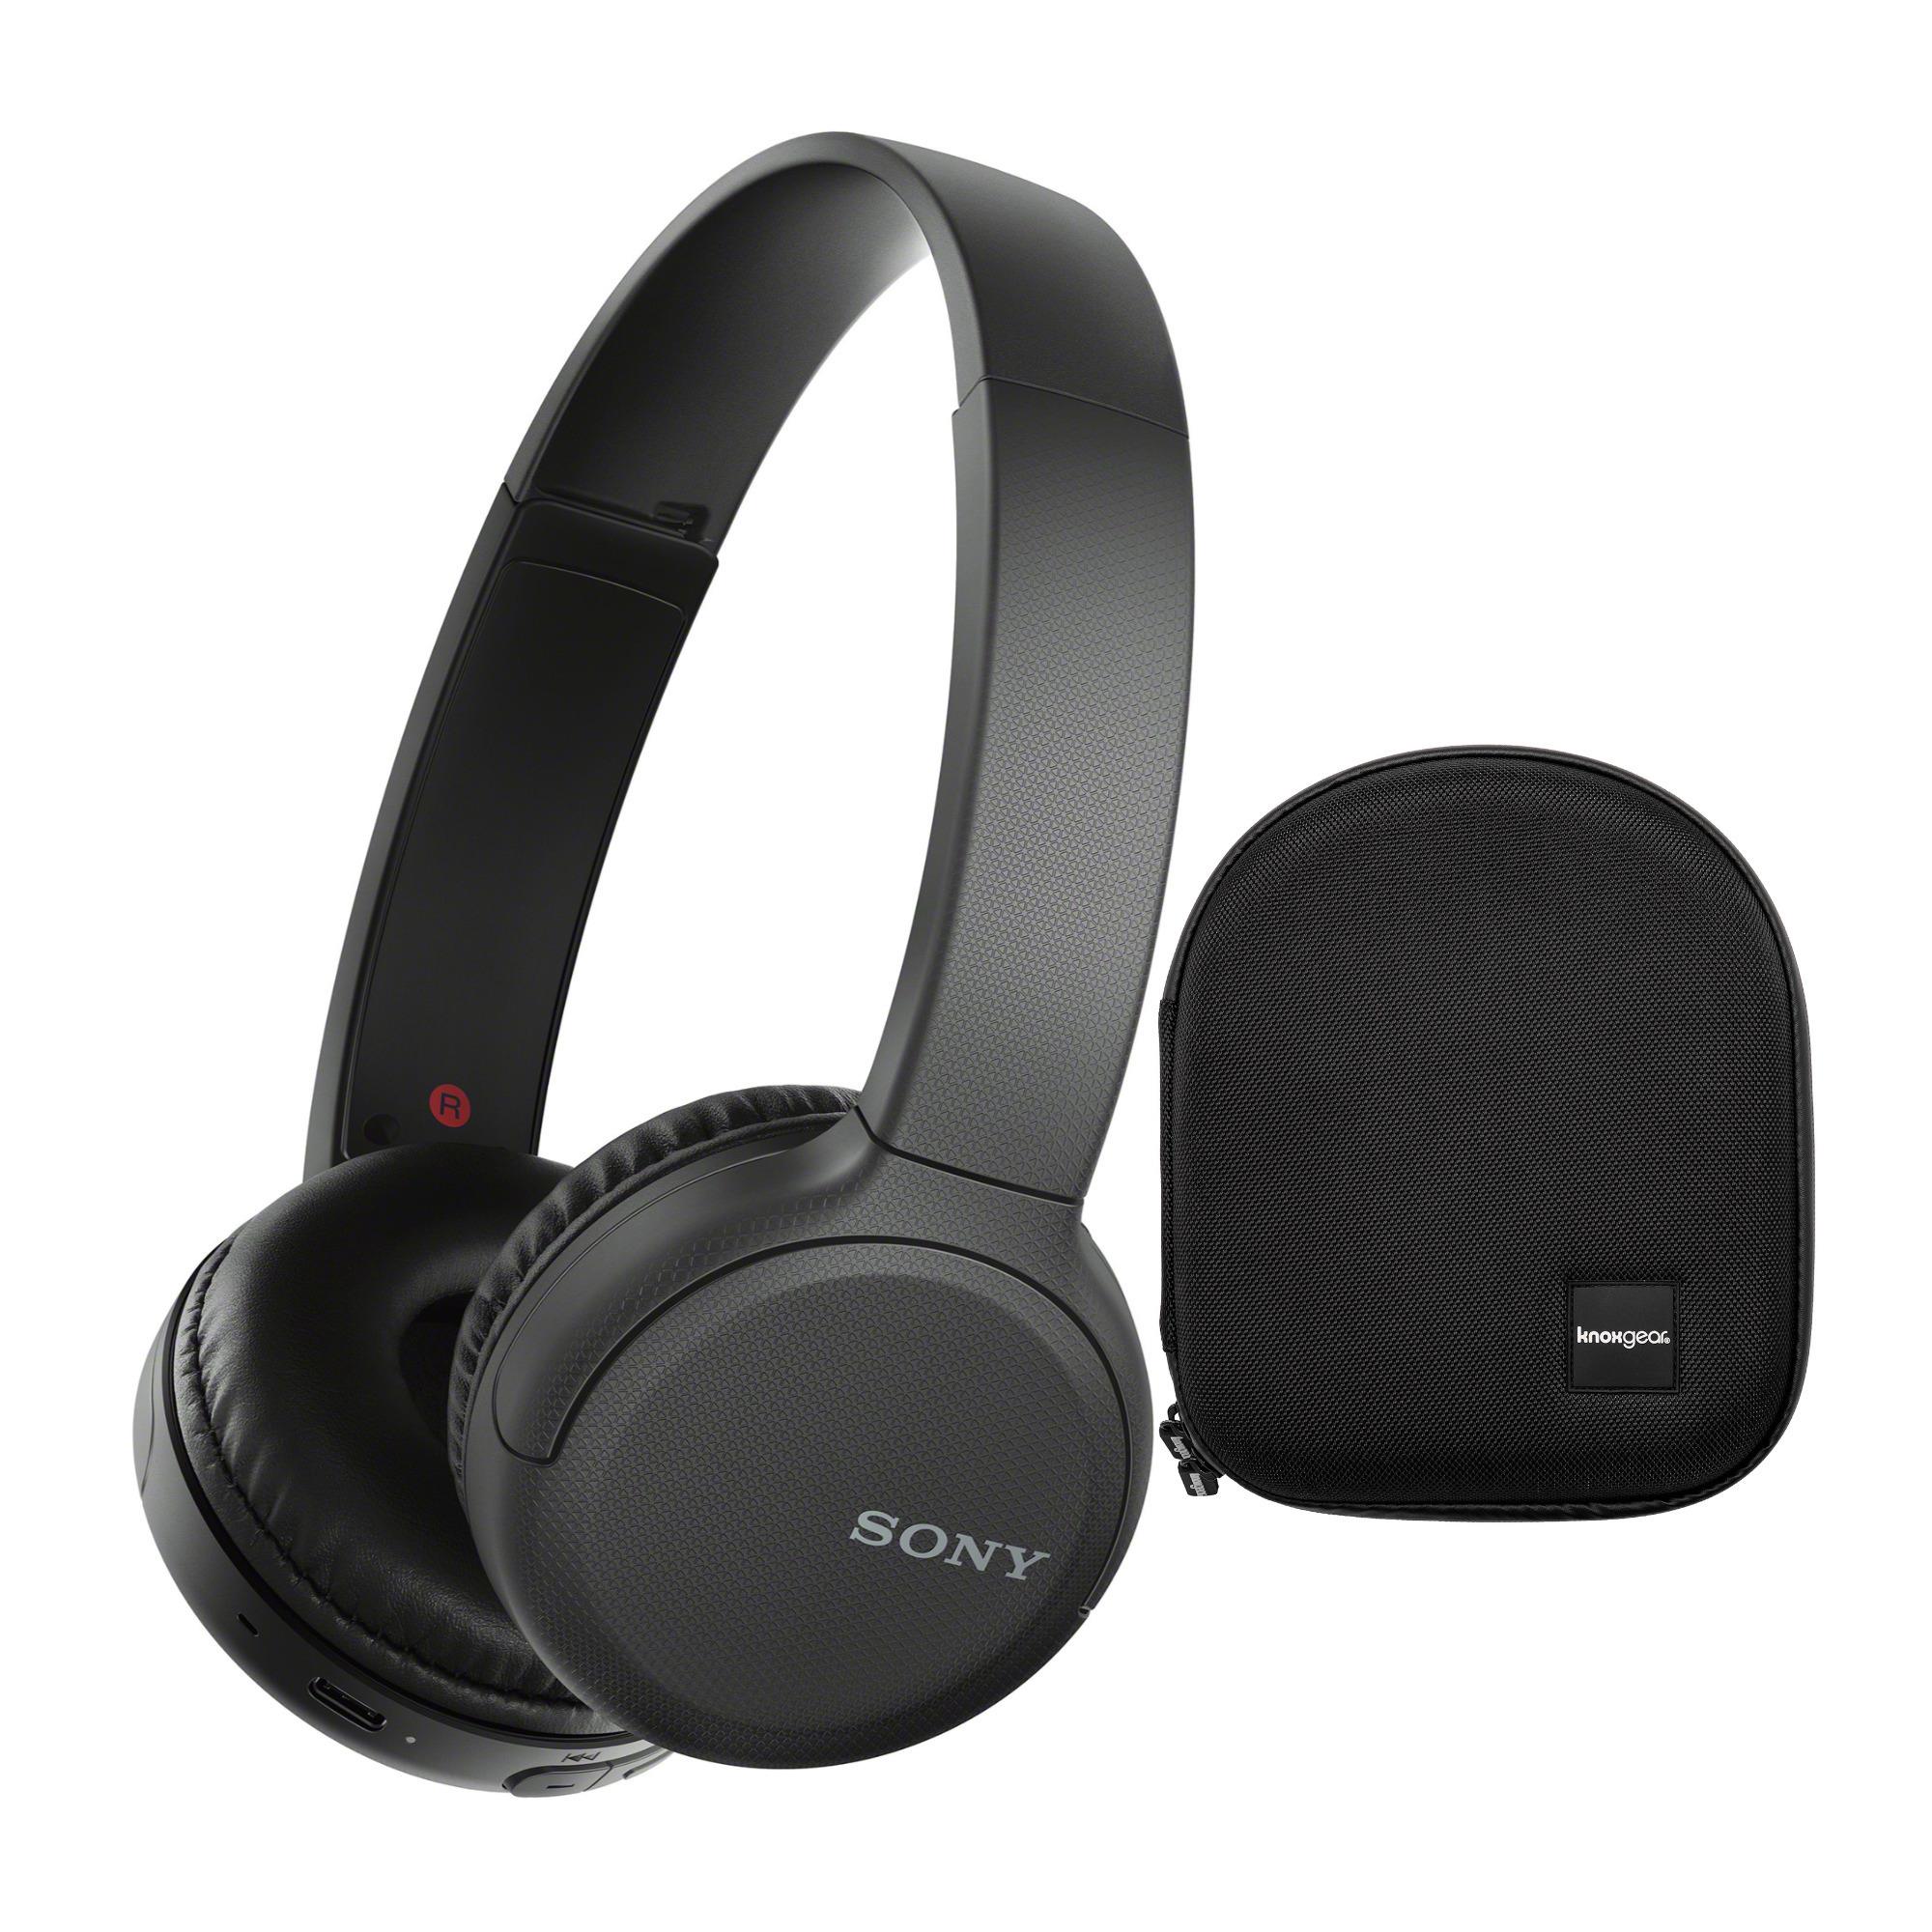 Sony WH-CH510 Wireless On-Ear Headphones (Black) with Hardshell Case Bundle - image 1 of 10